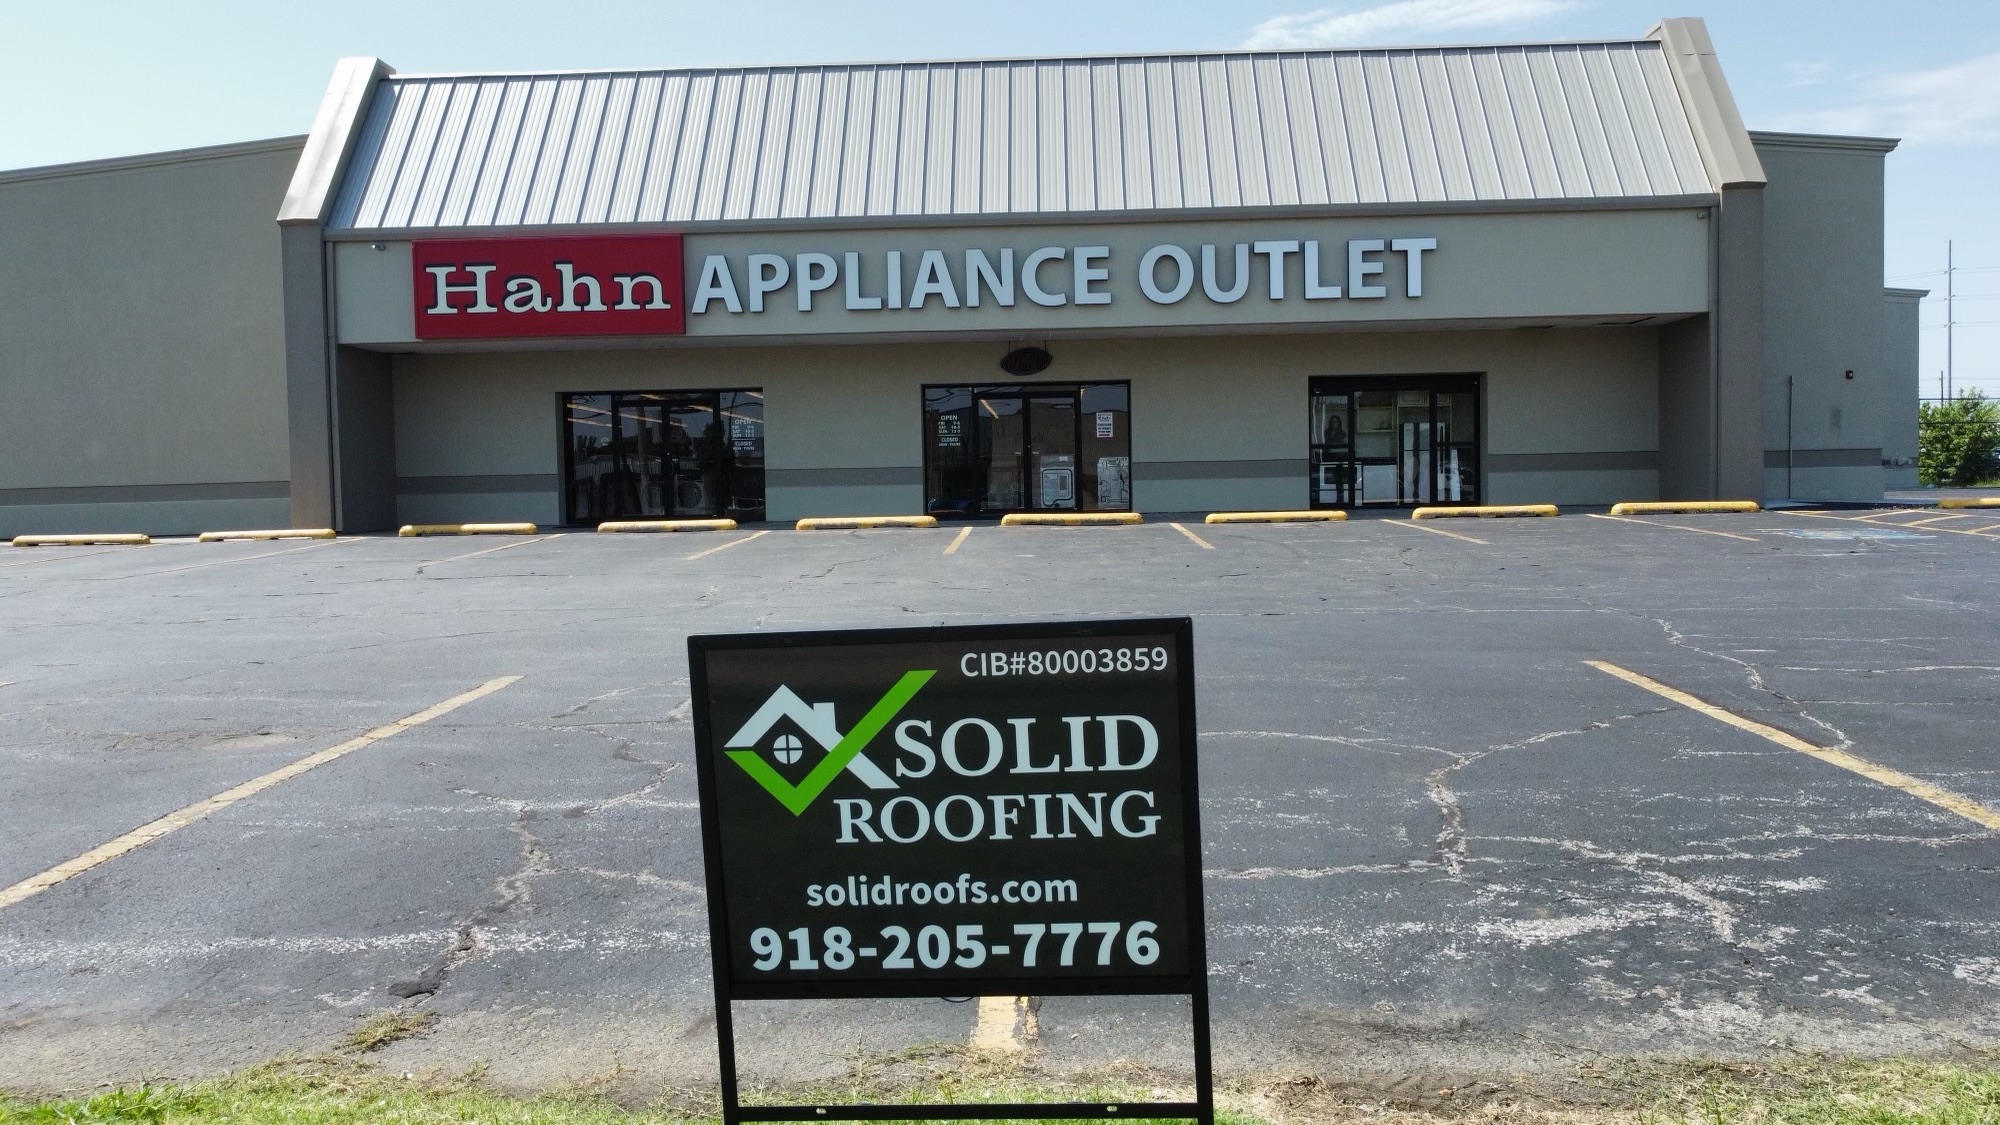 Commercial Roof Replacement finished project at Hahn Appliance